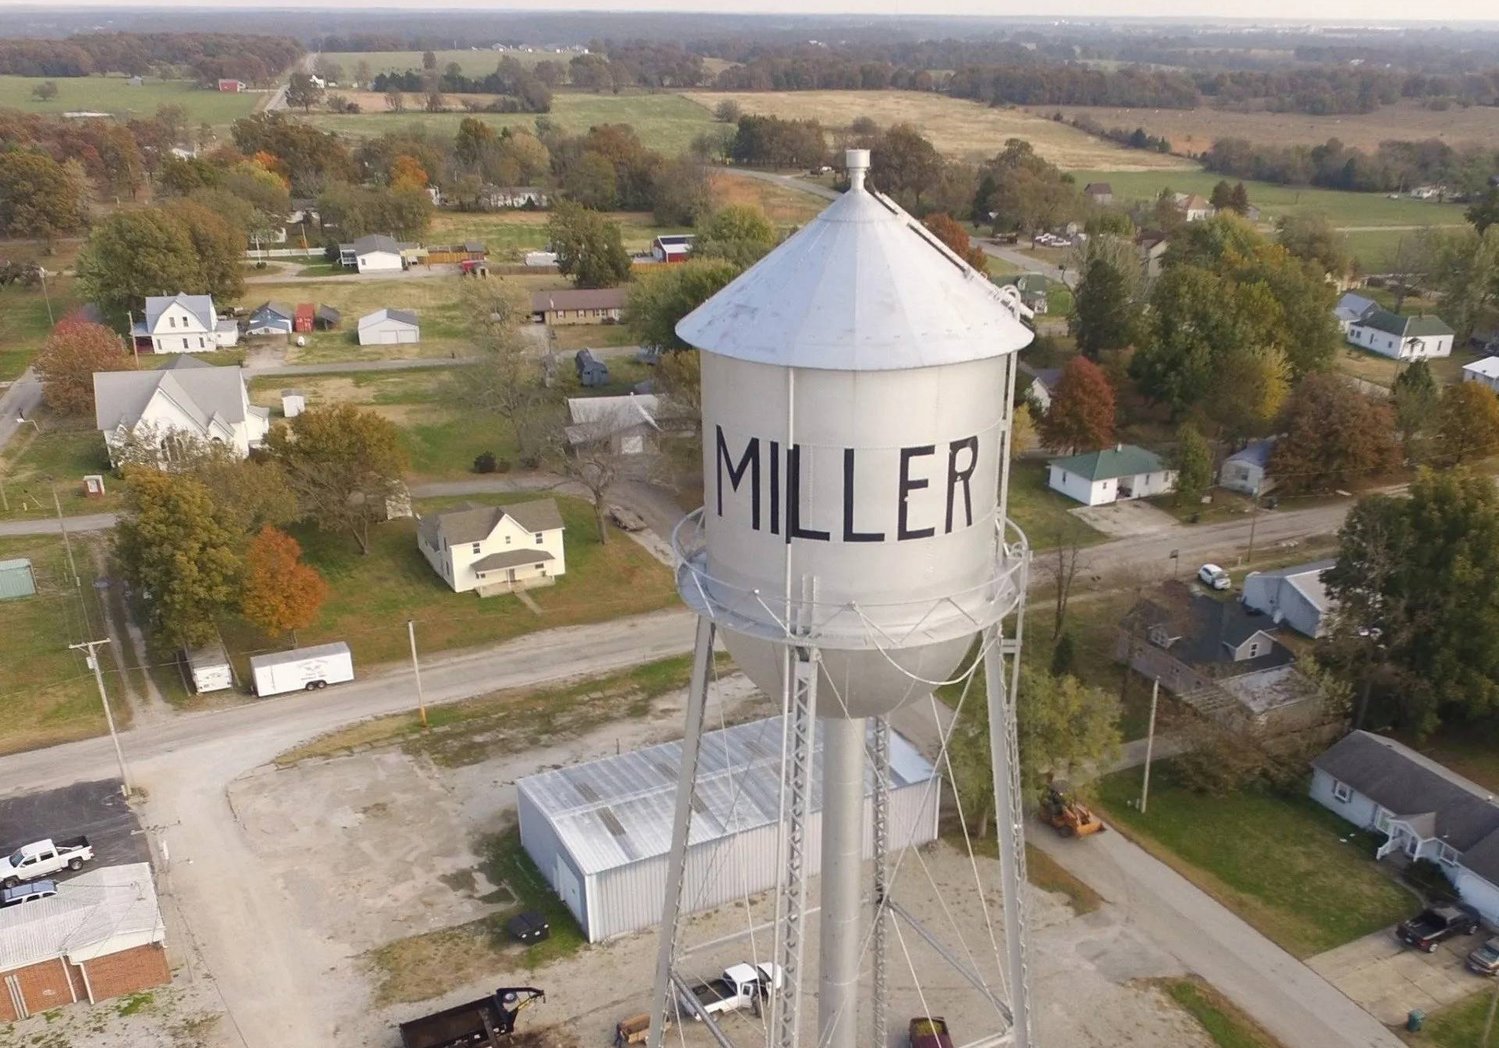 The city of Miller will conduct wastewater and collection system improvements.